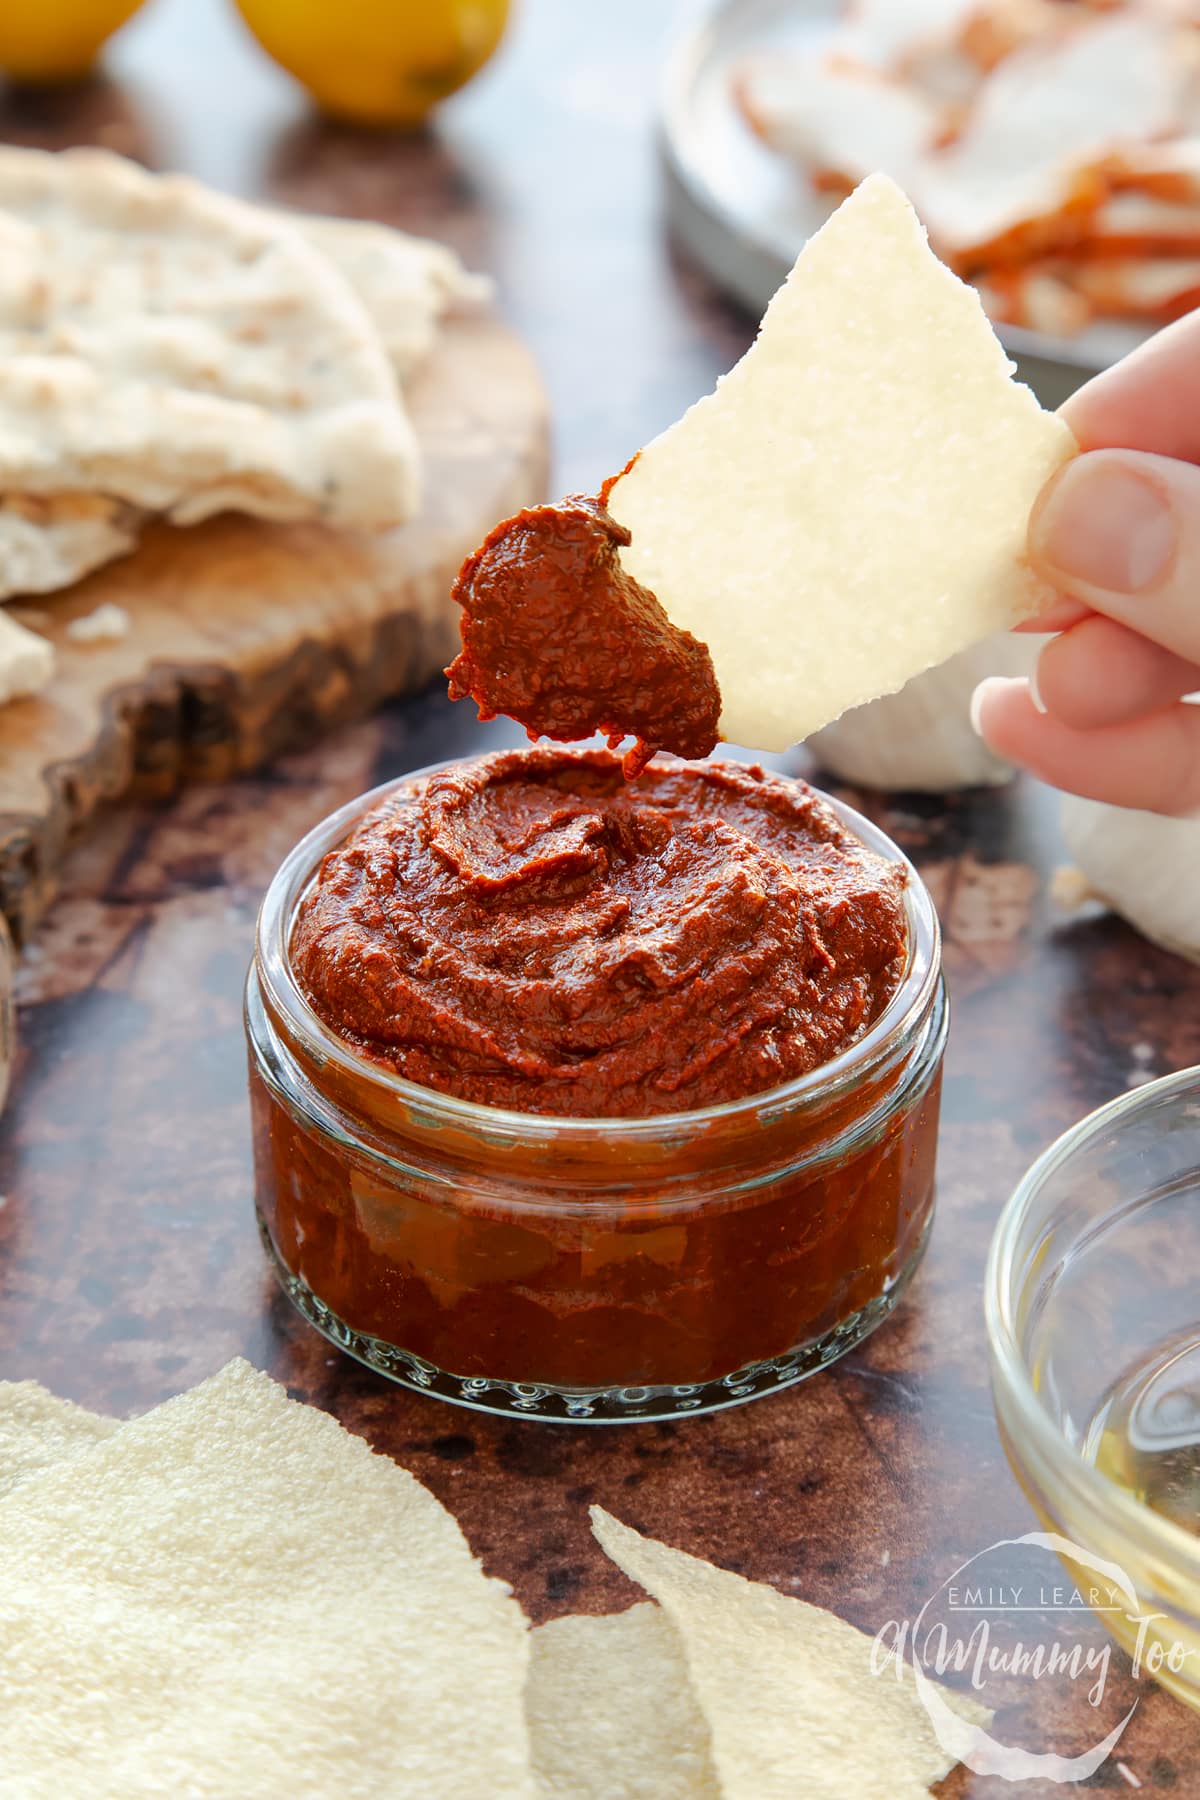 Front view of a hand holding a piece of bread dipping into garlic chutney in a small glass jar